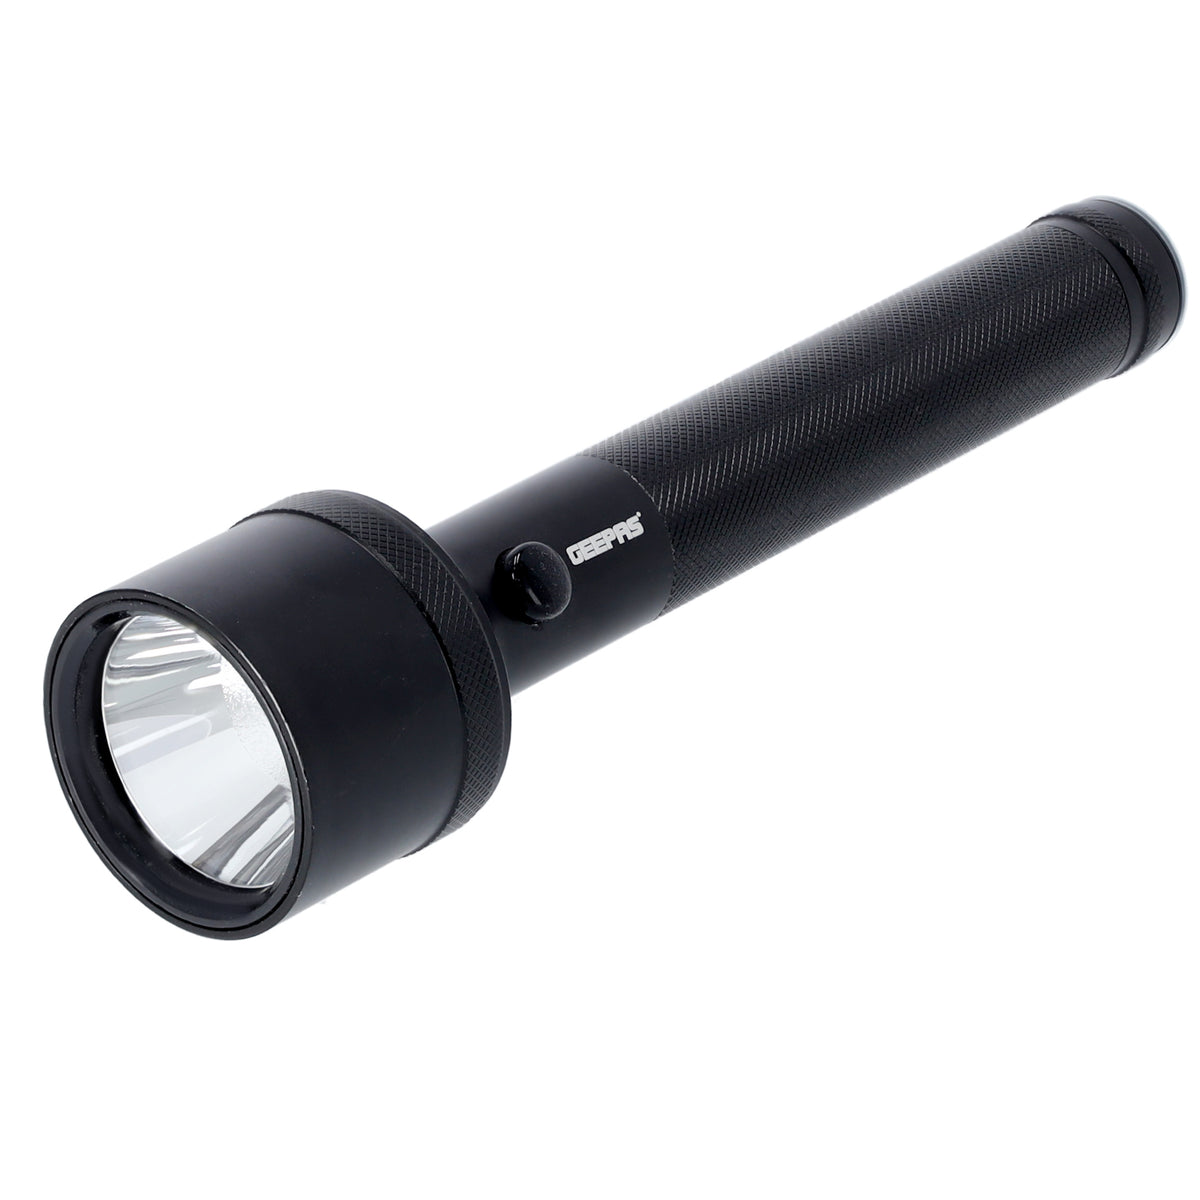 Geepas | For you. For life. Rechargeable LED Flashlight XPE Torch Lighting